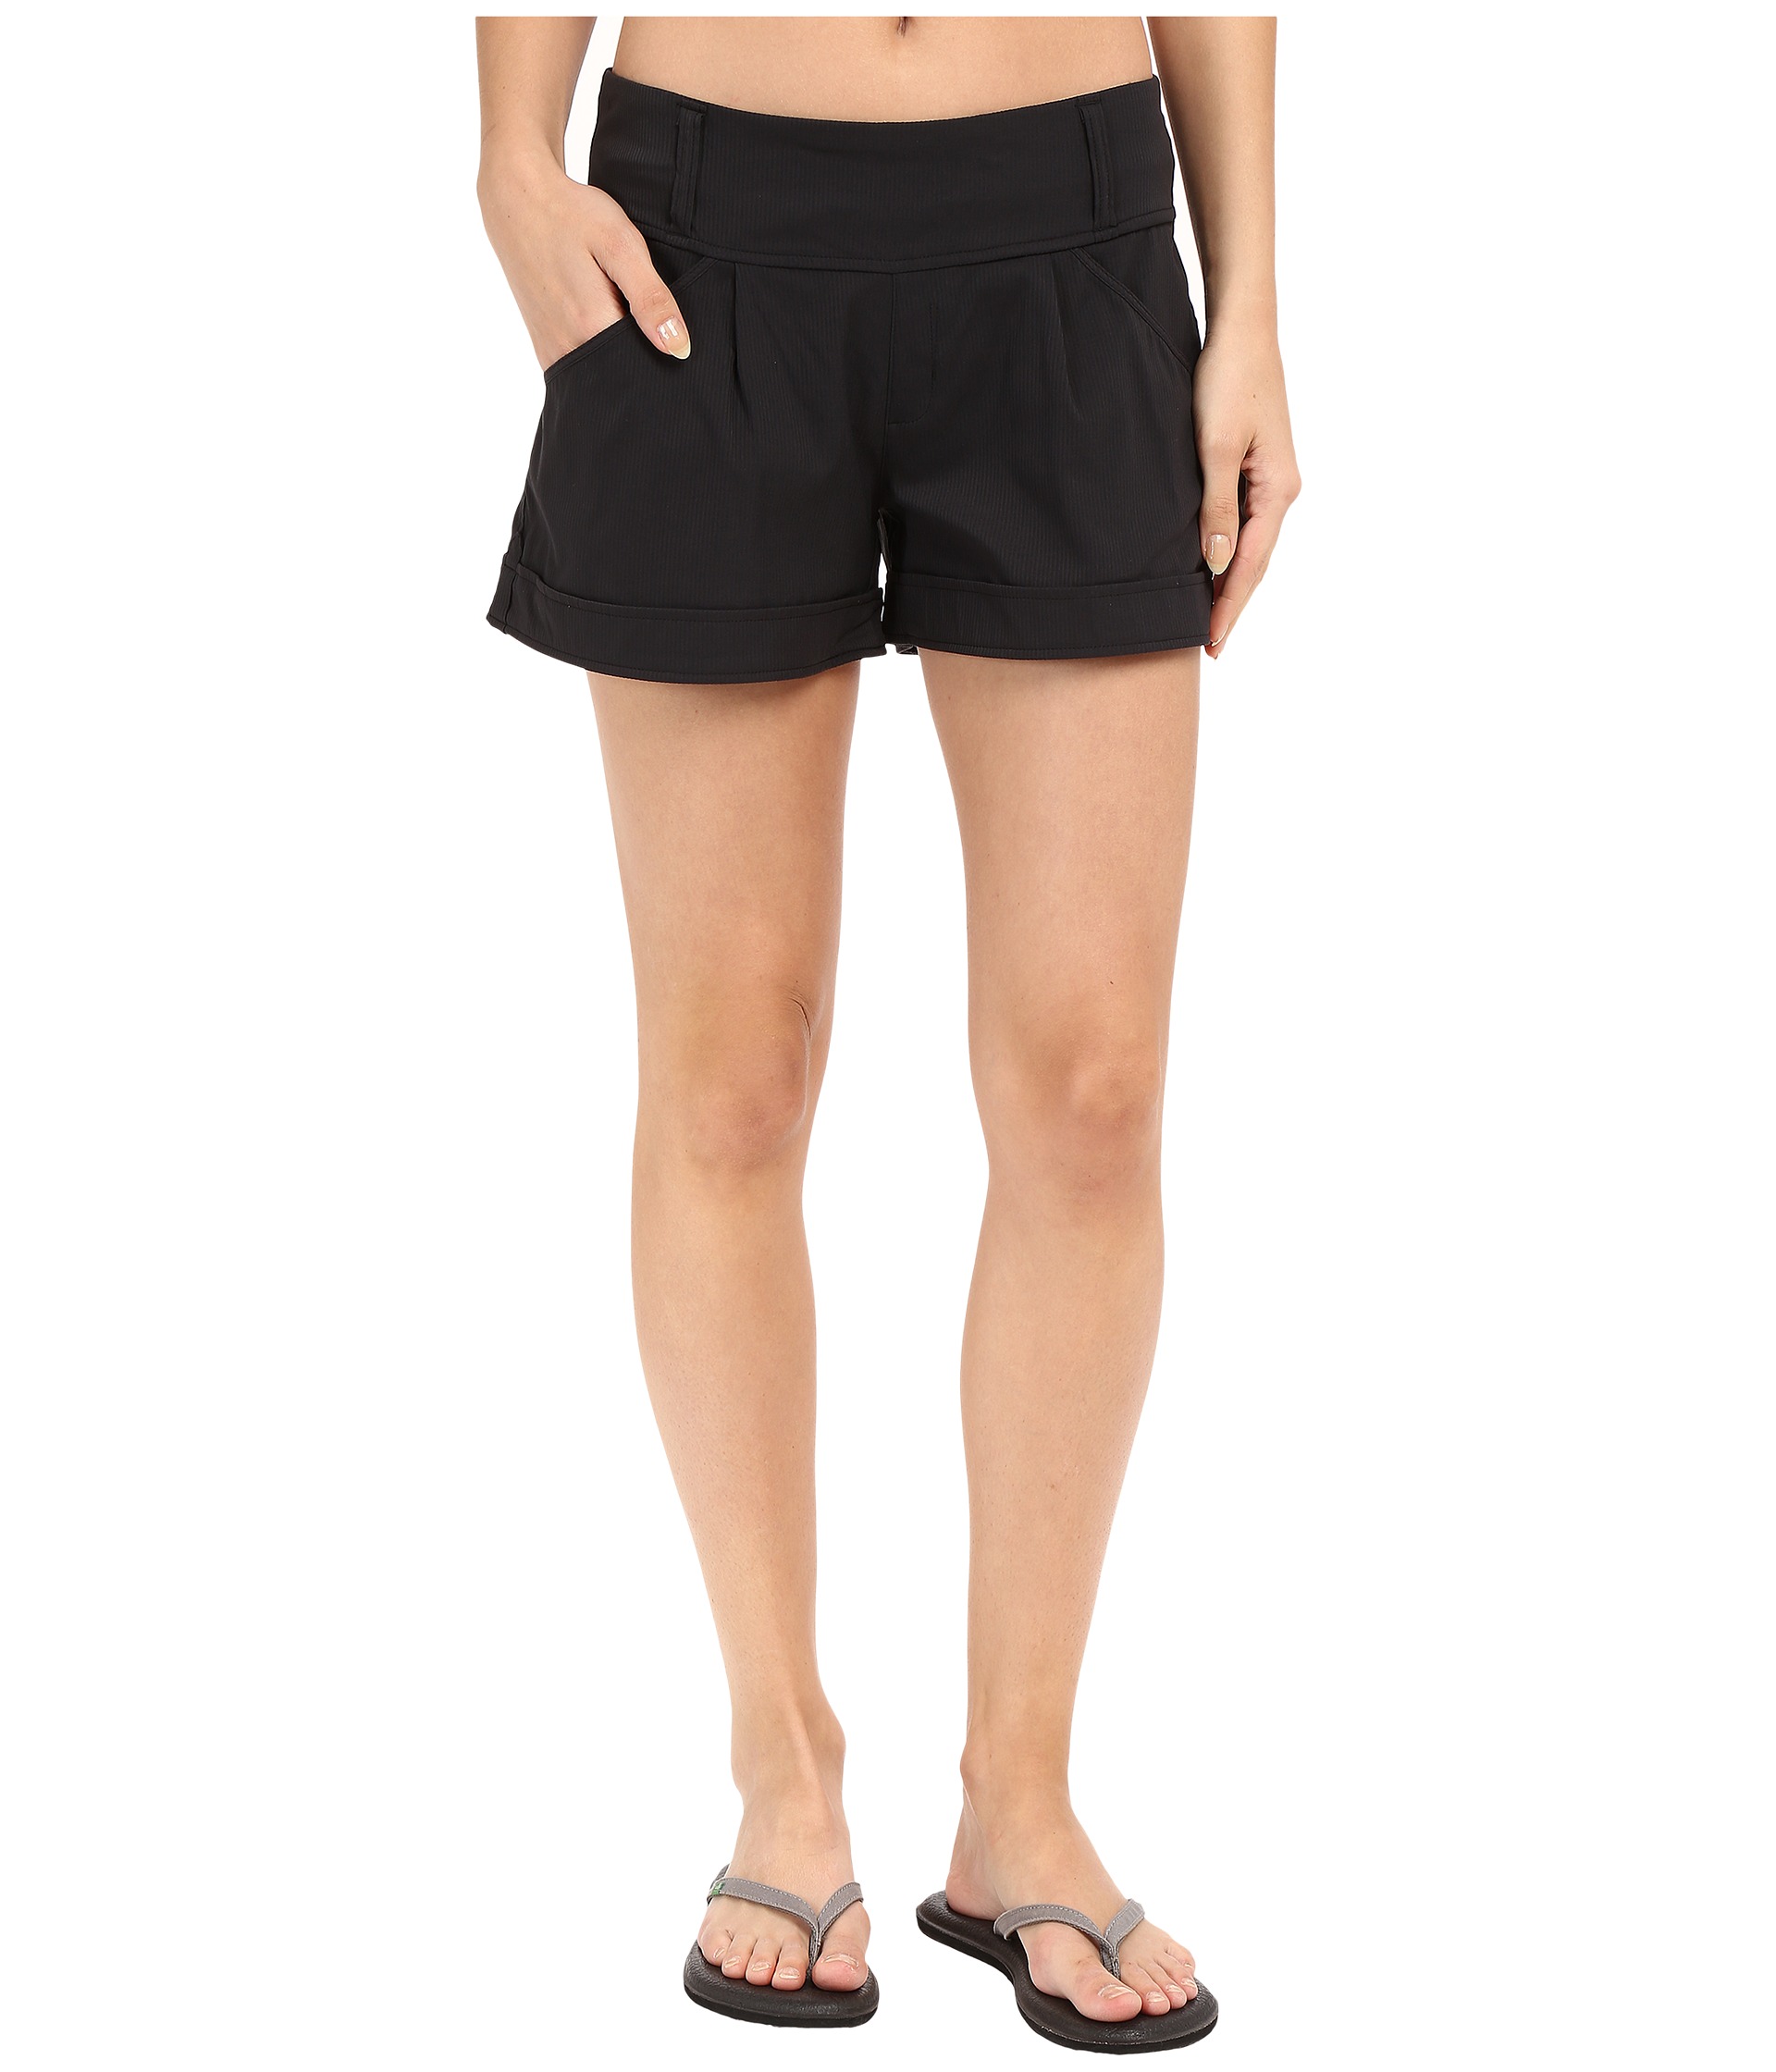 Lole Harbour Shorts Black - Zappos.com Free Shipping BOTH Ways